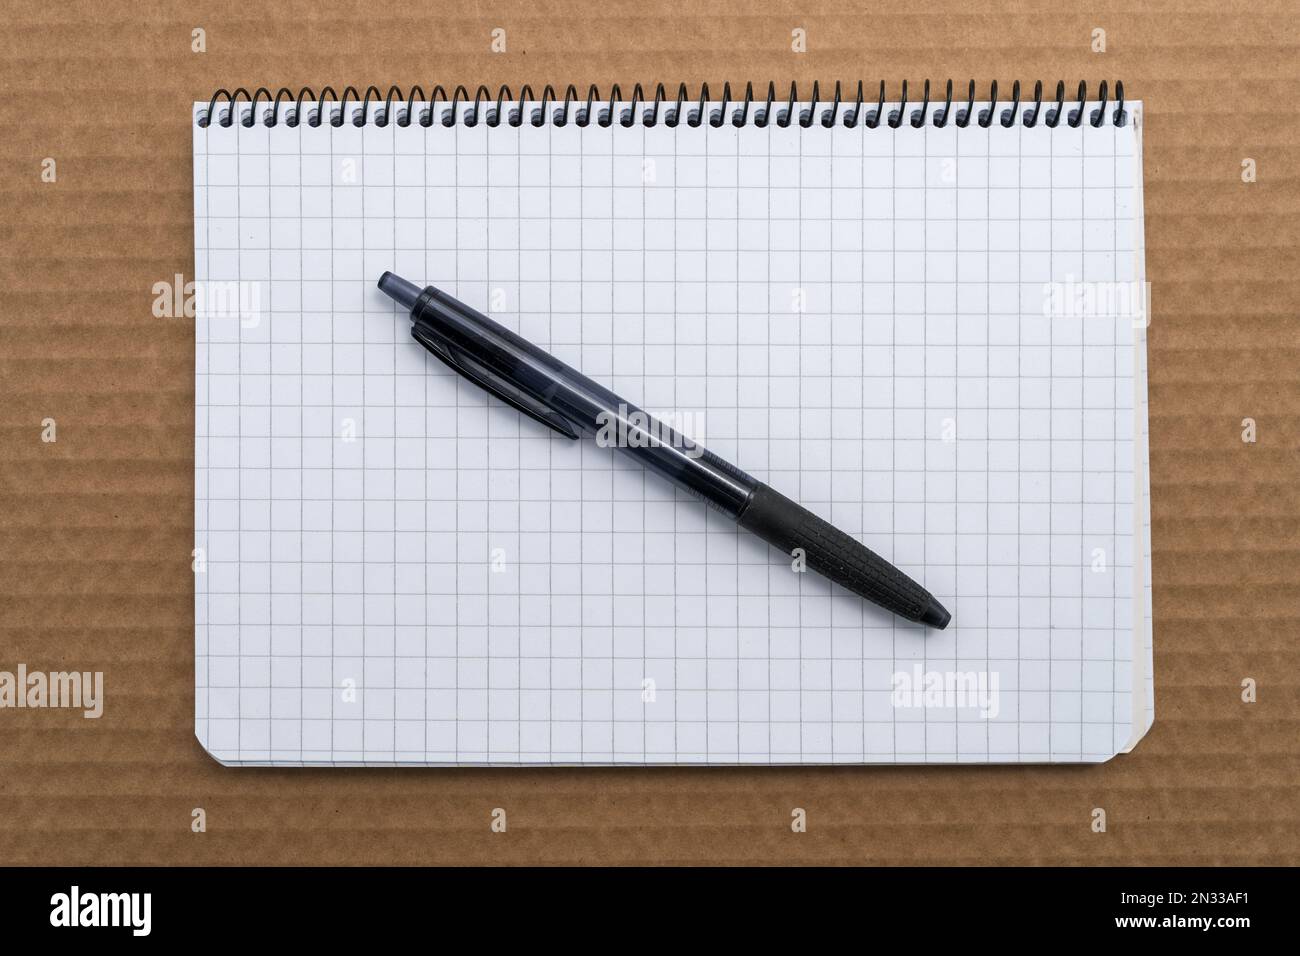 Graph paper spiral Notebook with black ballpoint pen on top of brown cardboard, top view. Stock Photo